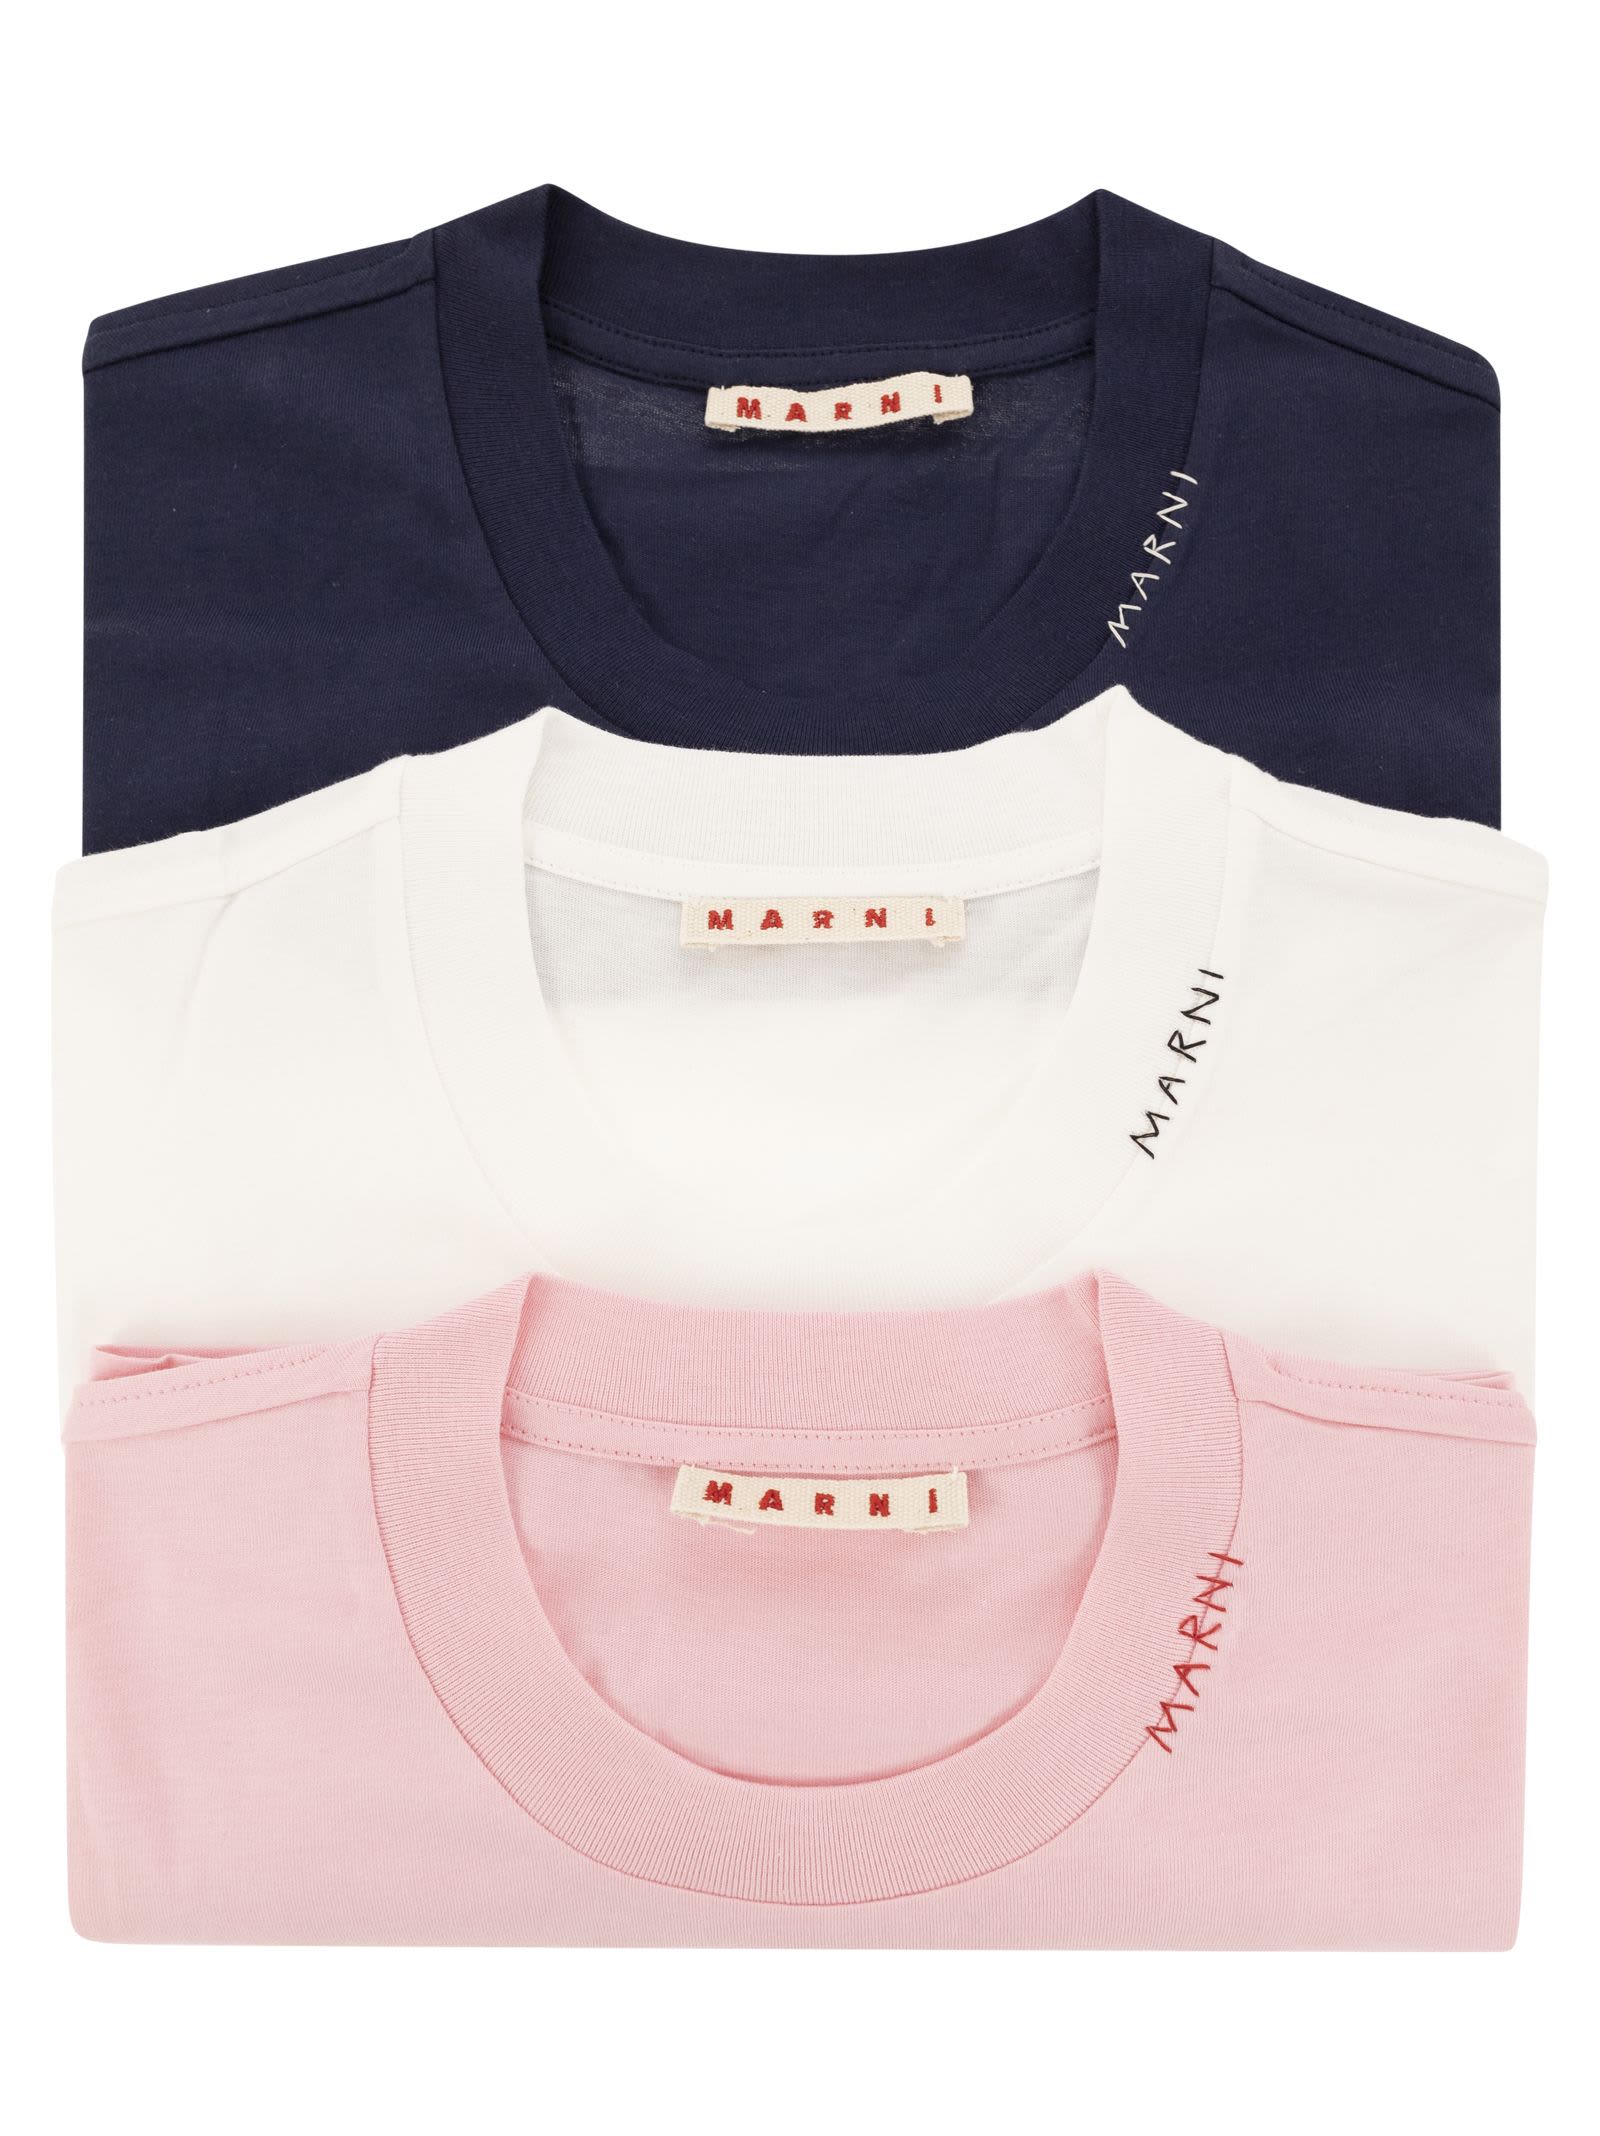 Shop Marni Set Of 3 Cotton T-shirts In Pink/white/blue